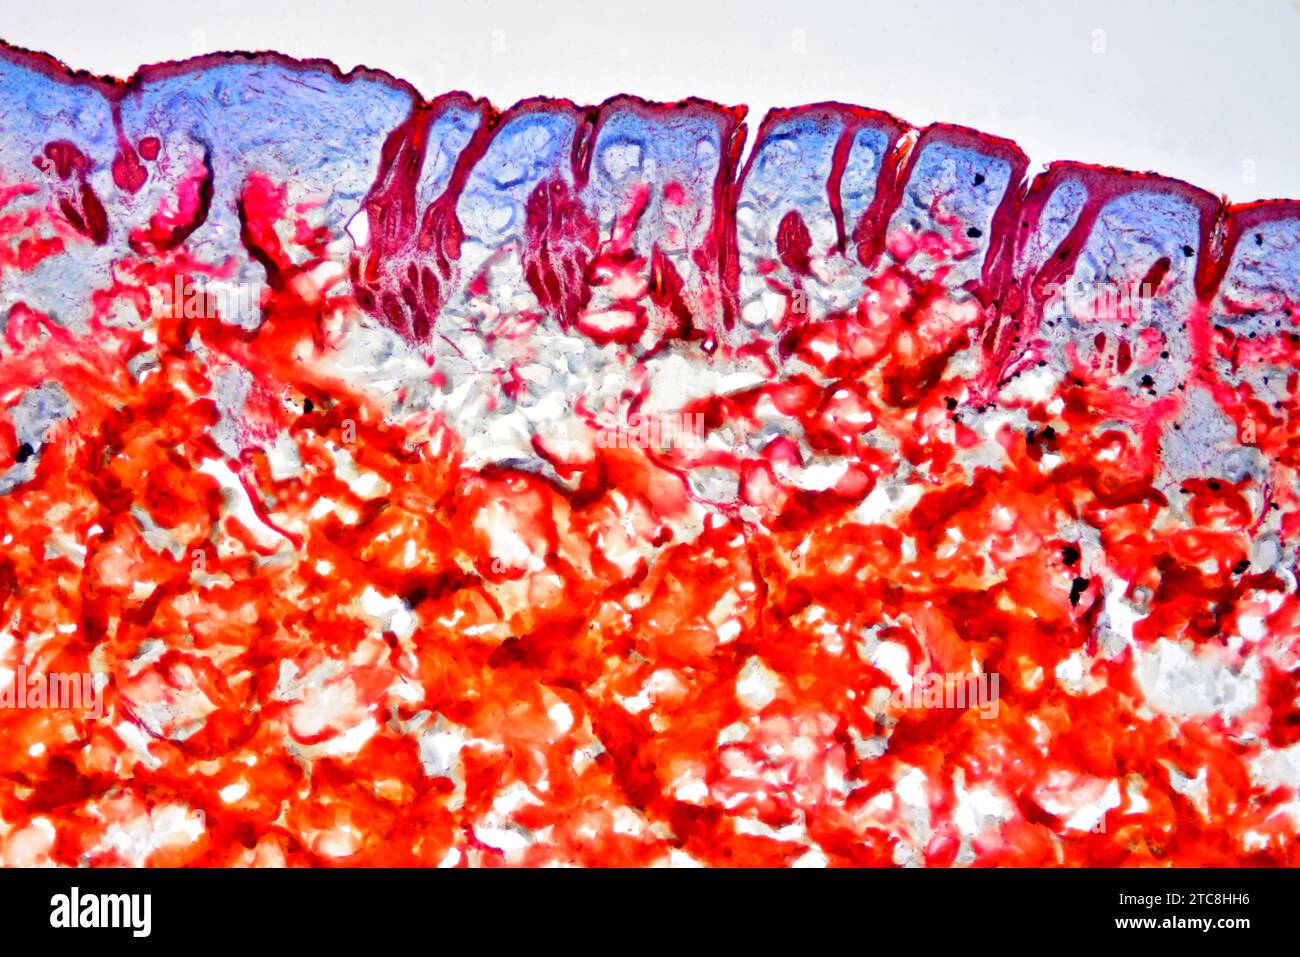 Human skin with scabies, produced by a mite (Sarcoptes scabiei hominis). Light microscope X50 at 10 cm wide. Stock Photo